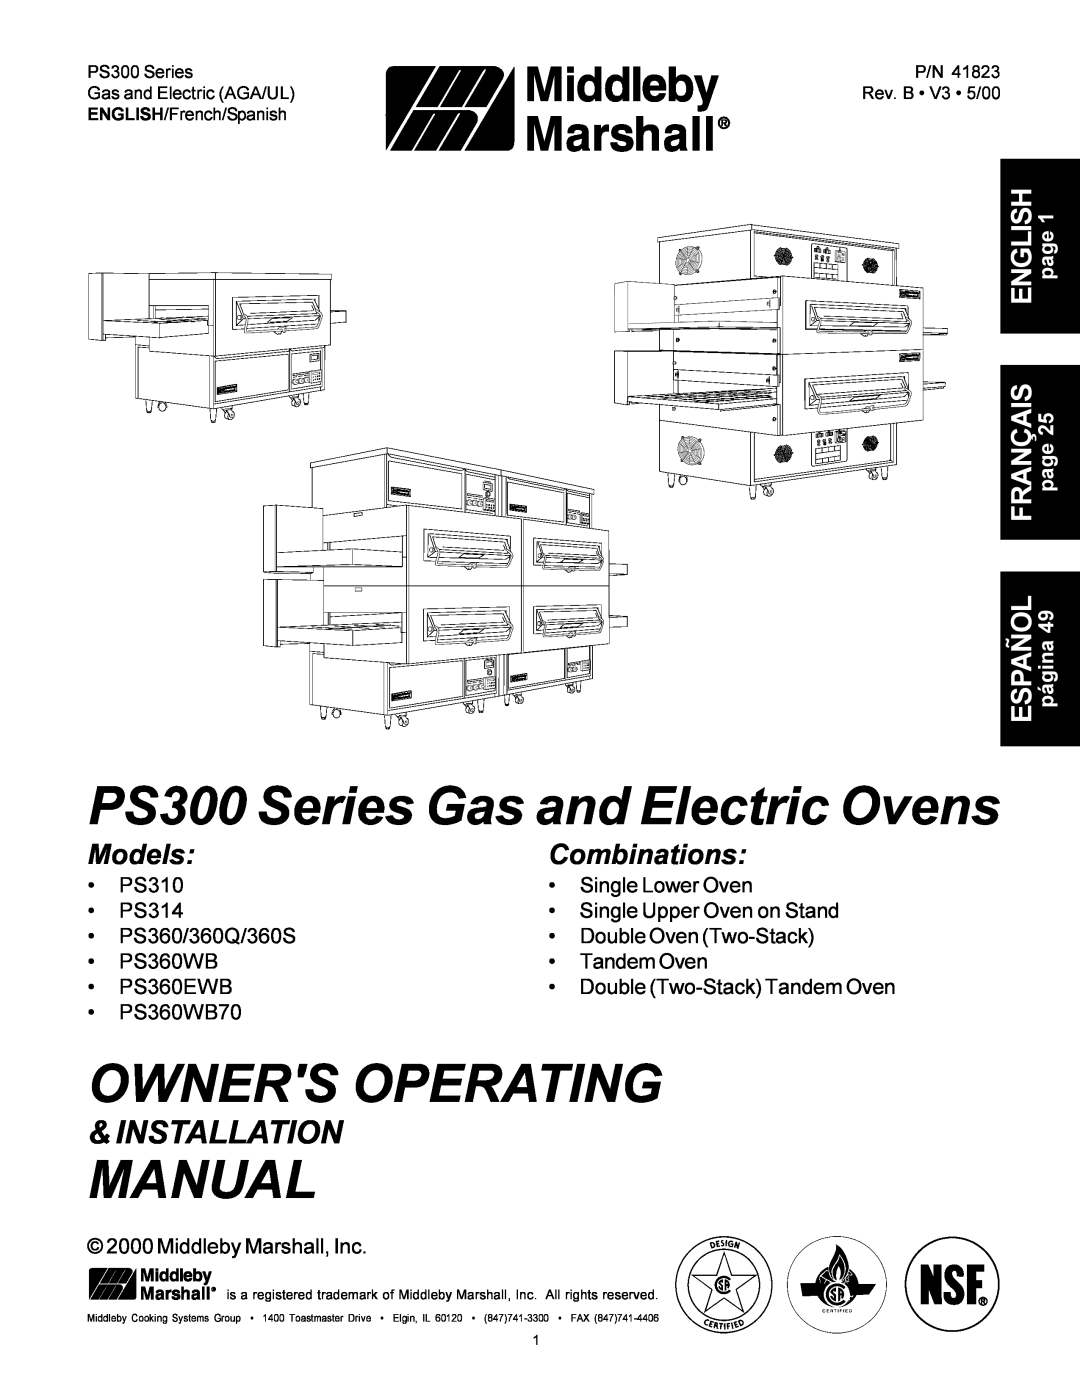 Middleby Marshall PS360WB installation manual owners operating installation manual, A Middleby Company 